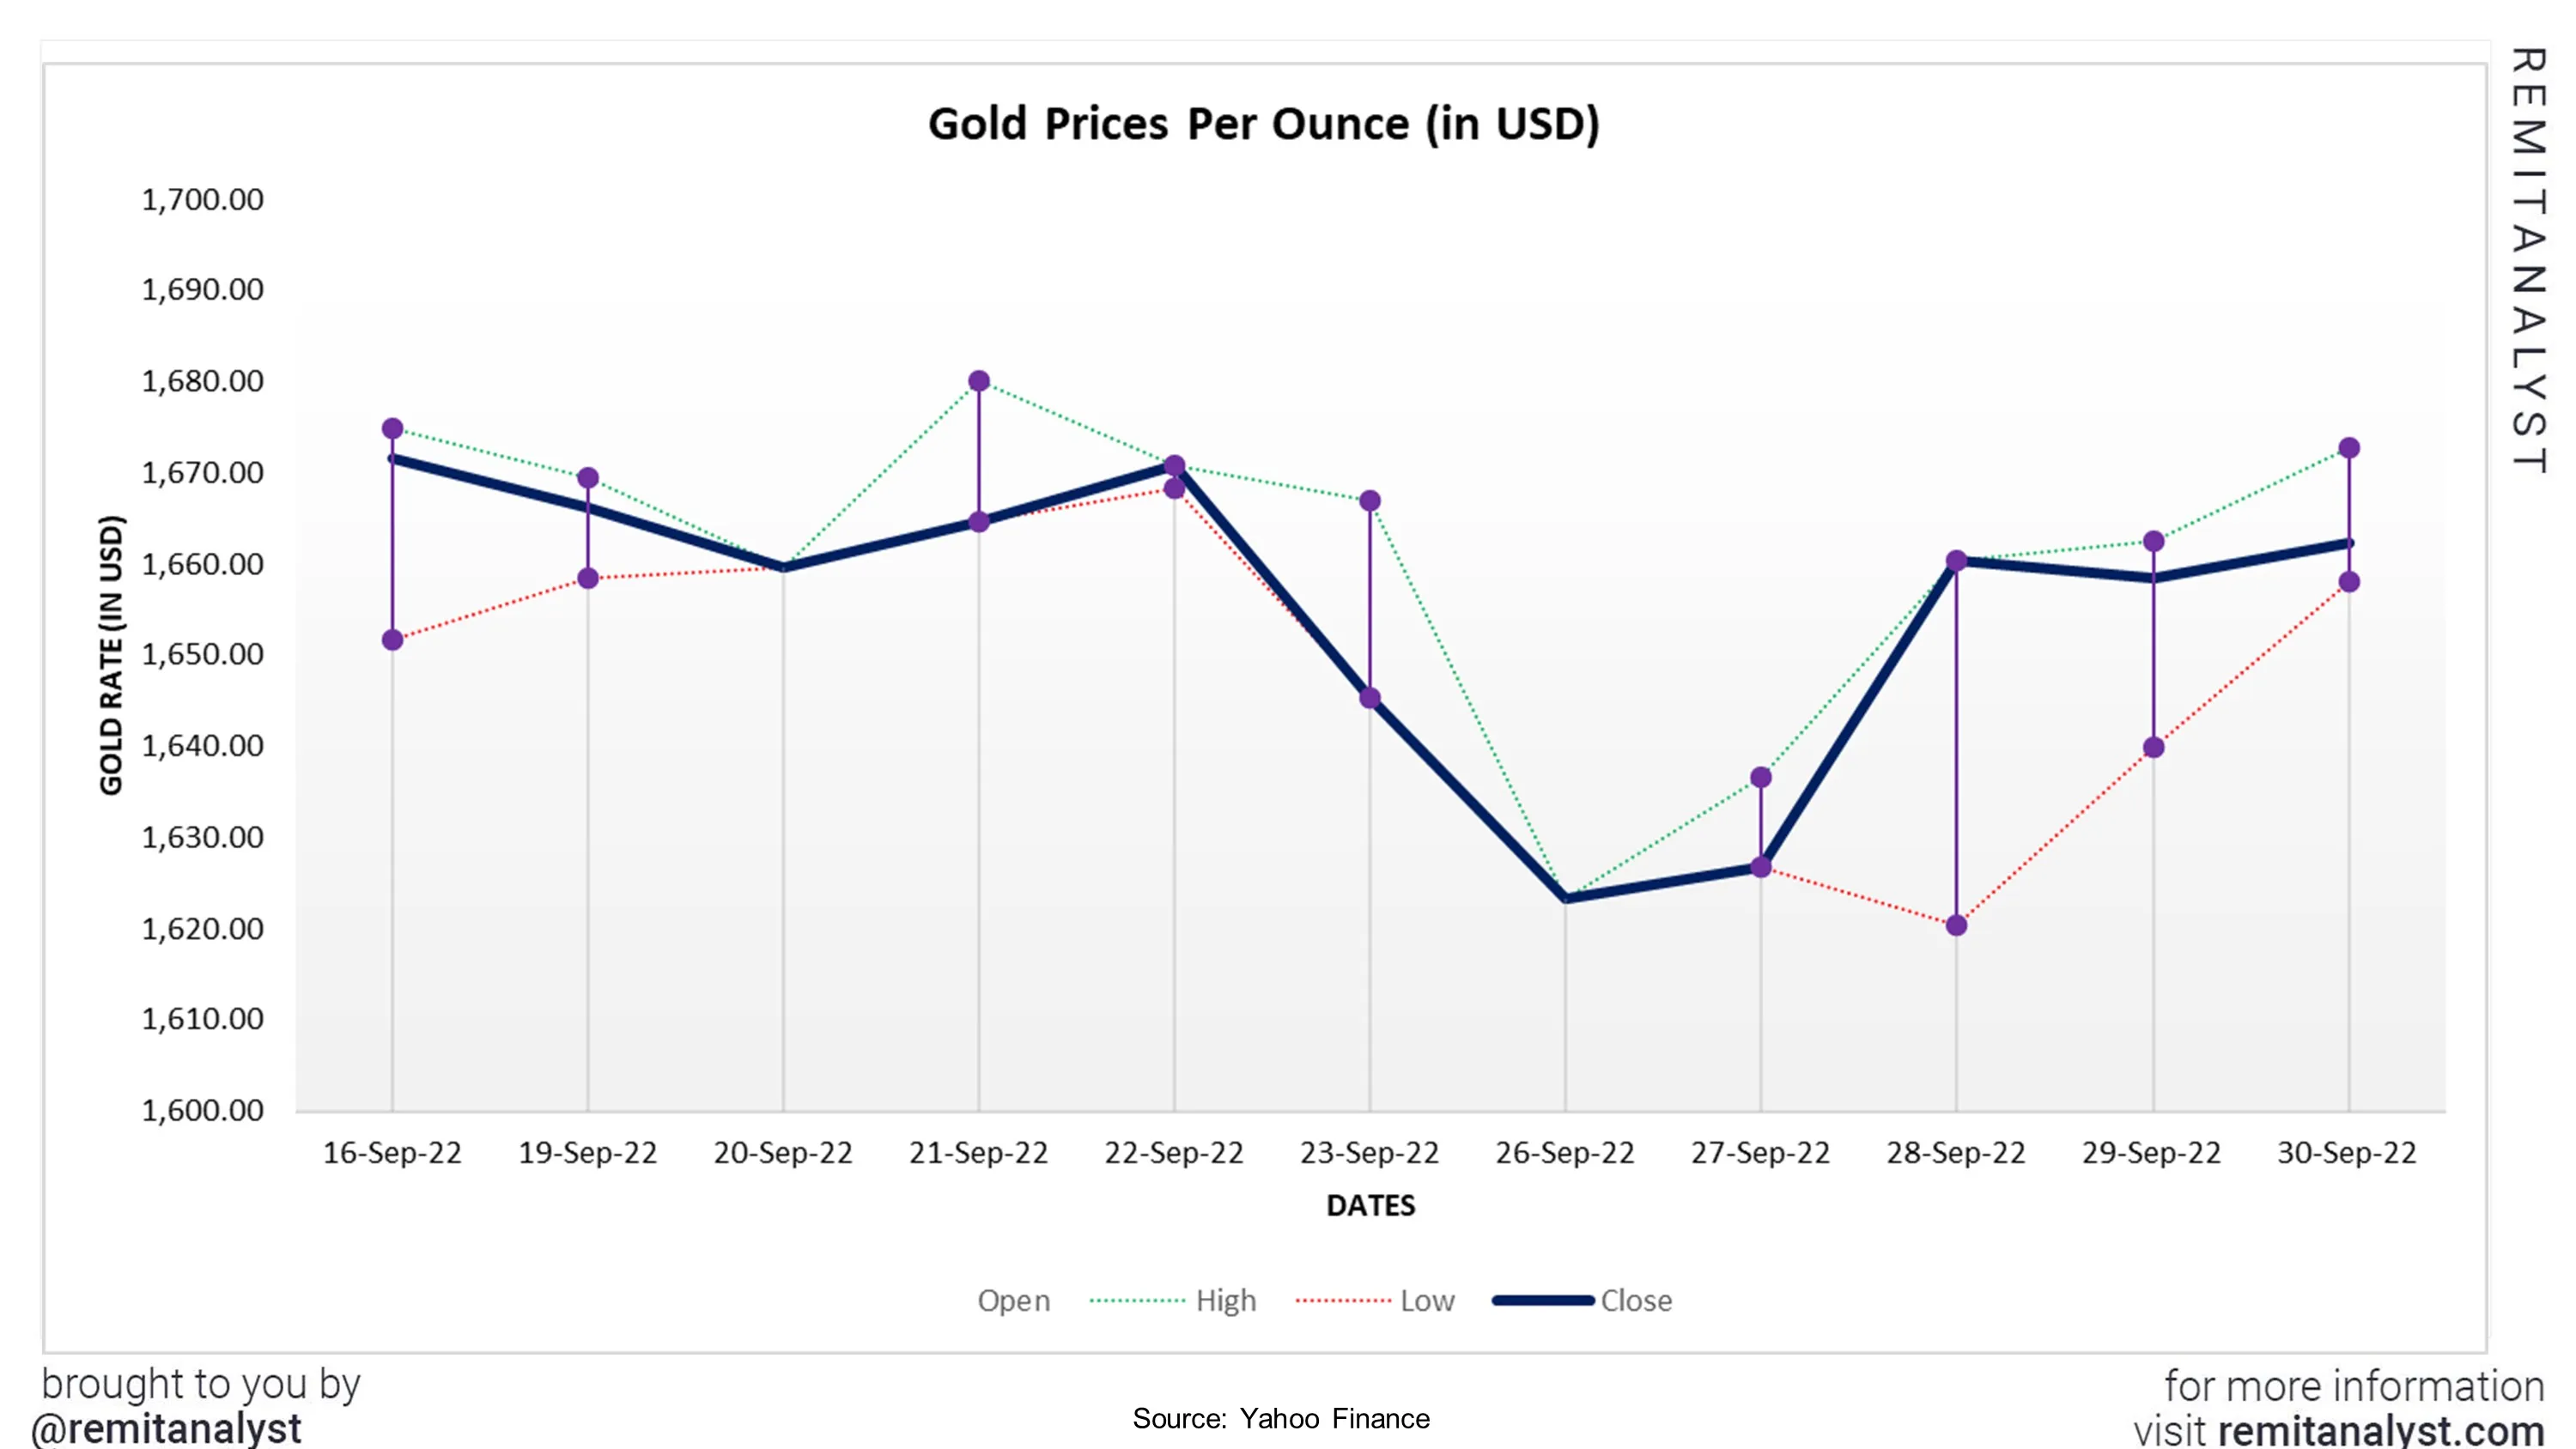 Gold-Prices-from-09-16-2022-to-09-30-2022